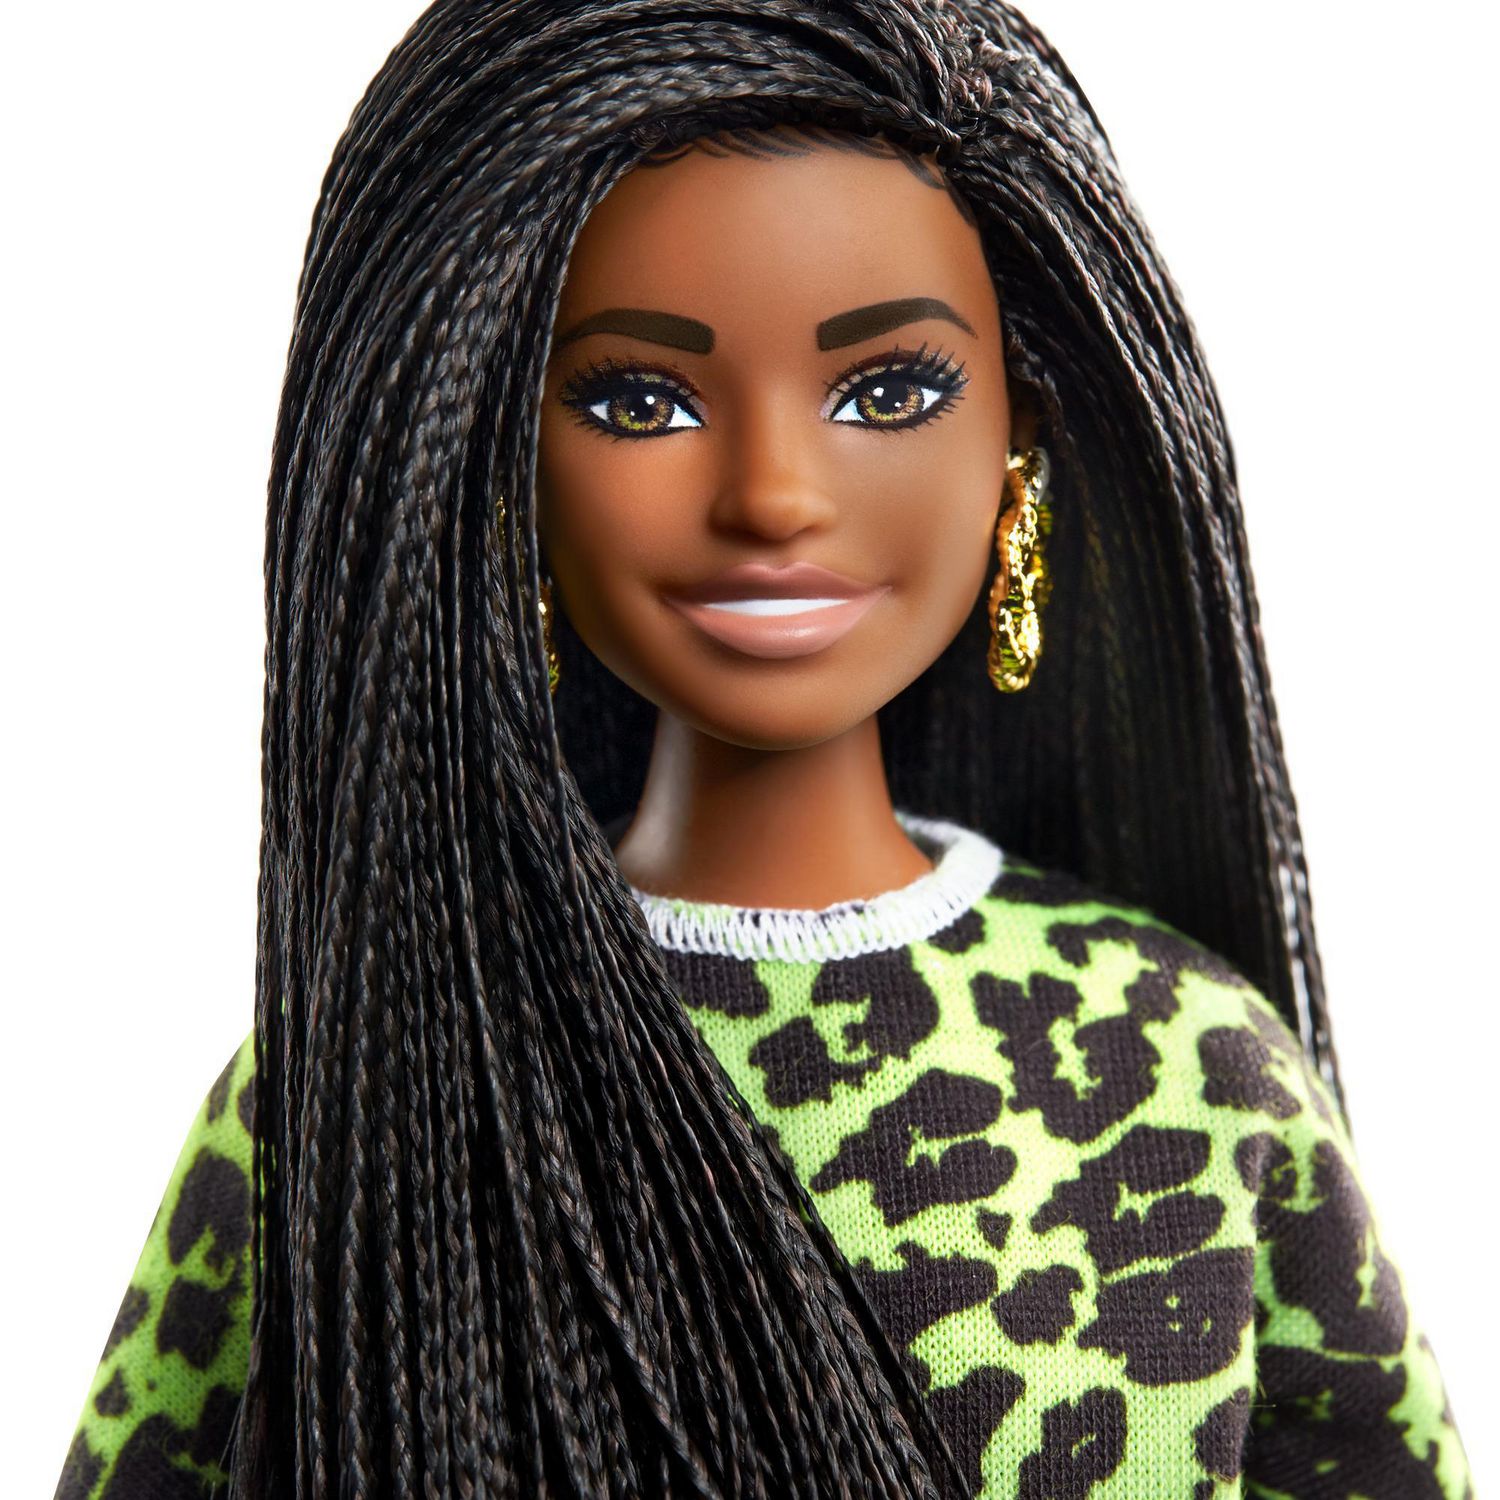 Barbie Fashionistas Doll with Long Brunette Braids Wearing Neon